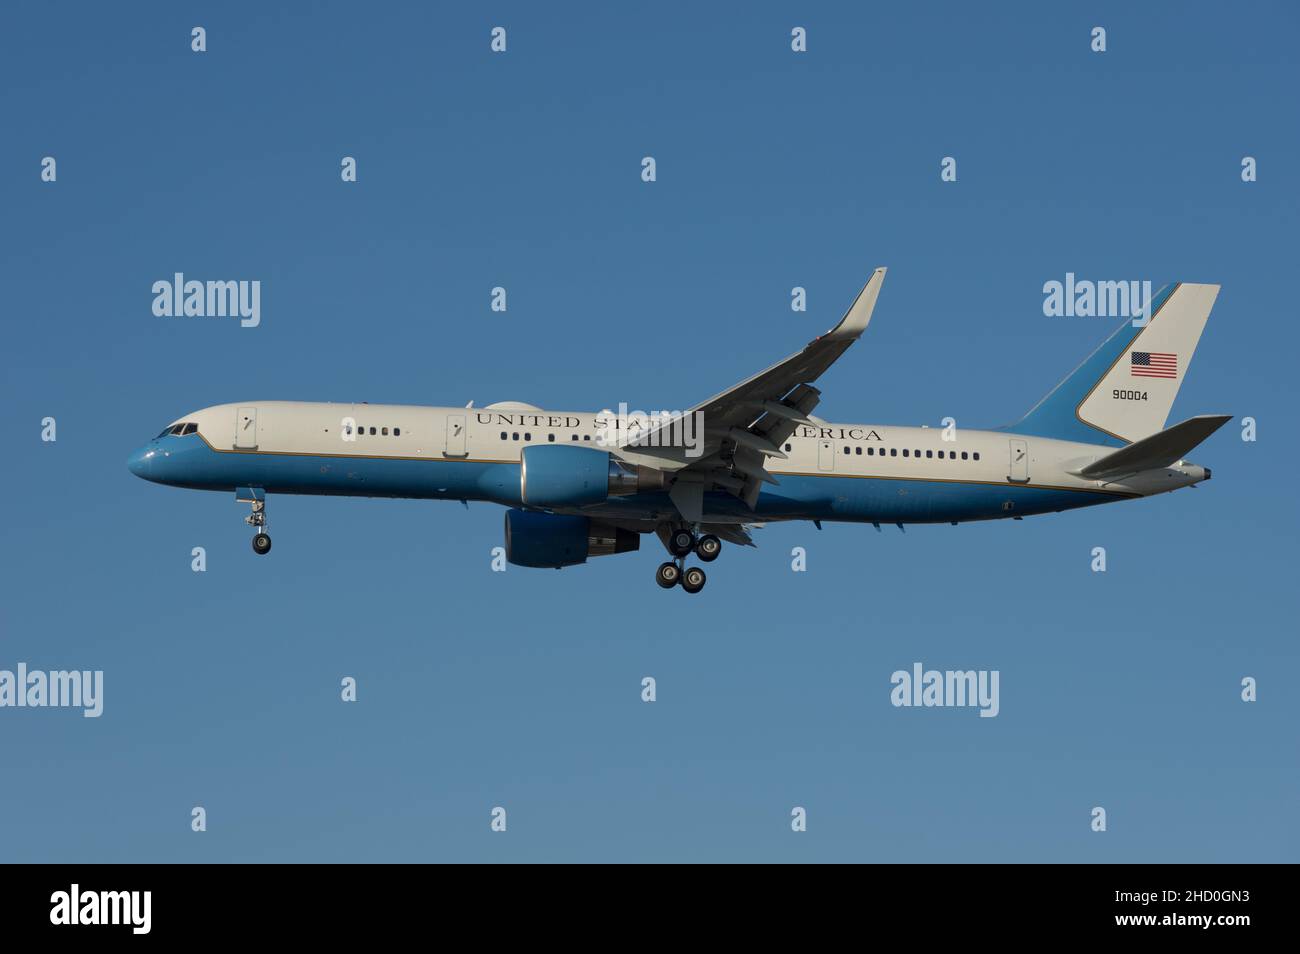 Los Angeles, California, USA - January 1, 2022: this image shows United States of America Boeing 757-200 C-32 with registration 90004 arriving at LAX, Stock Photo